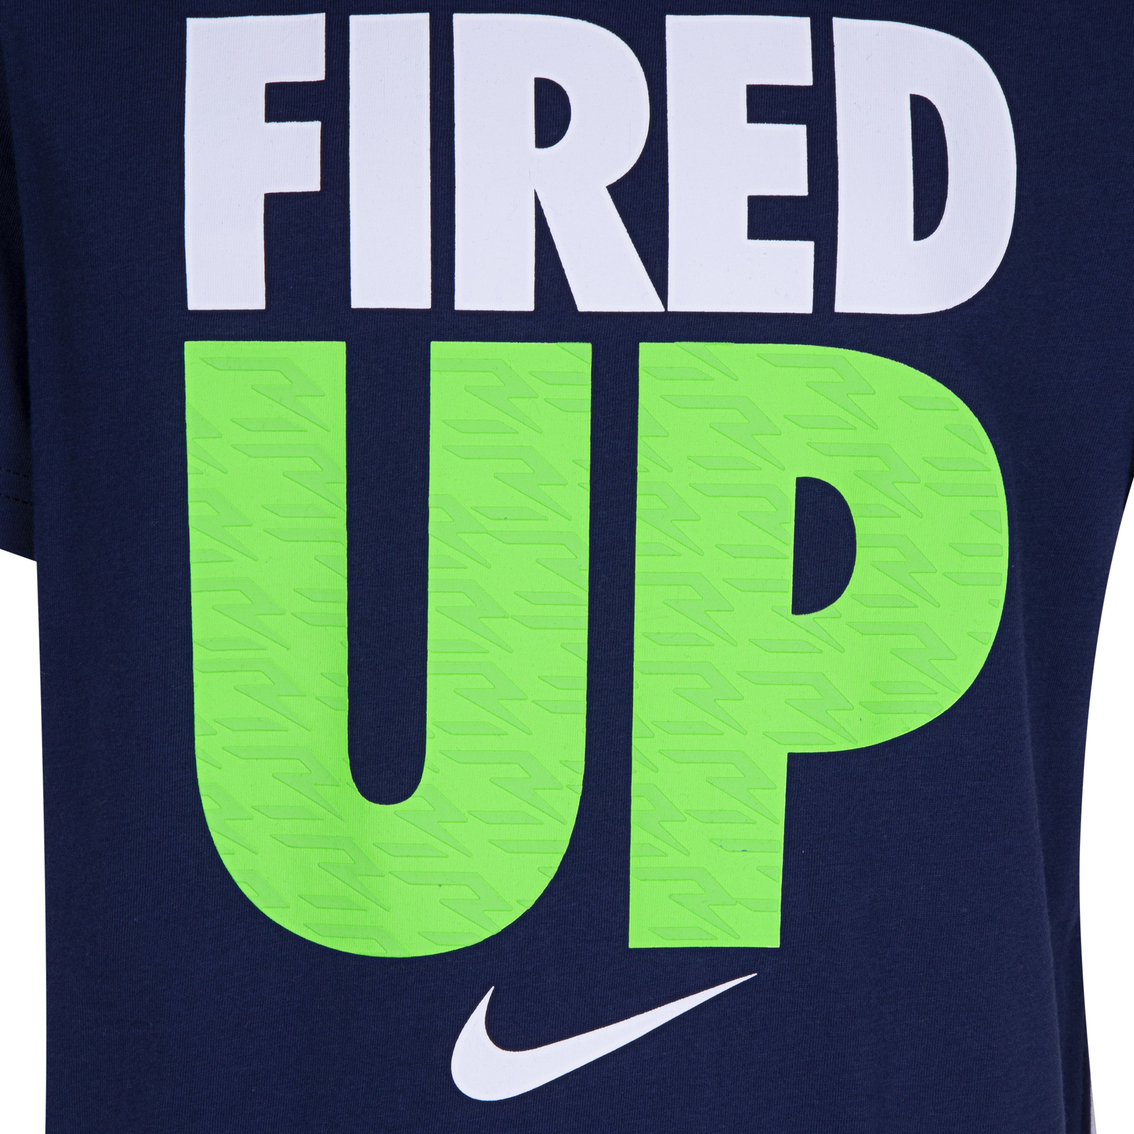 3Brand by Russell Wilson Boys Fill Fired Up Tee - Image 5 of 6